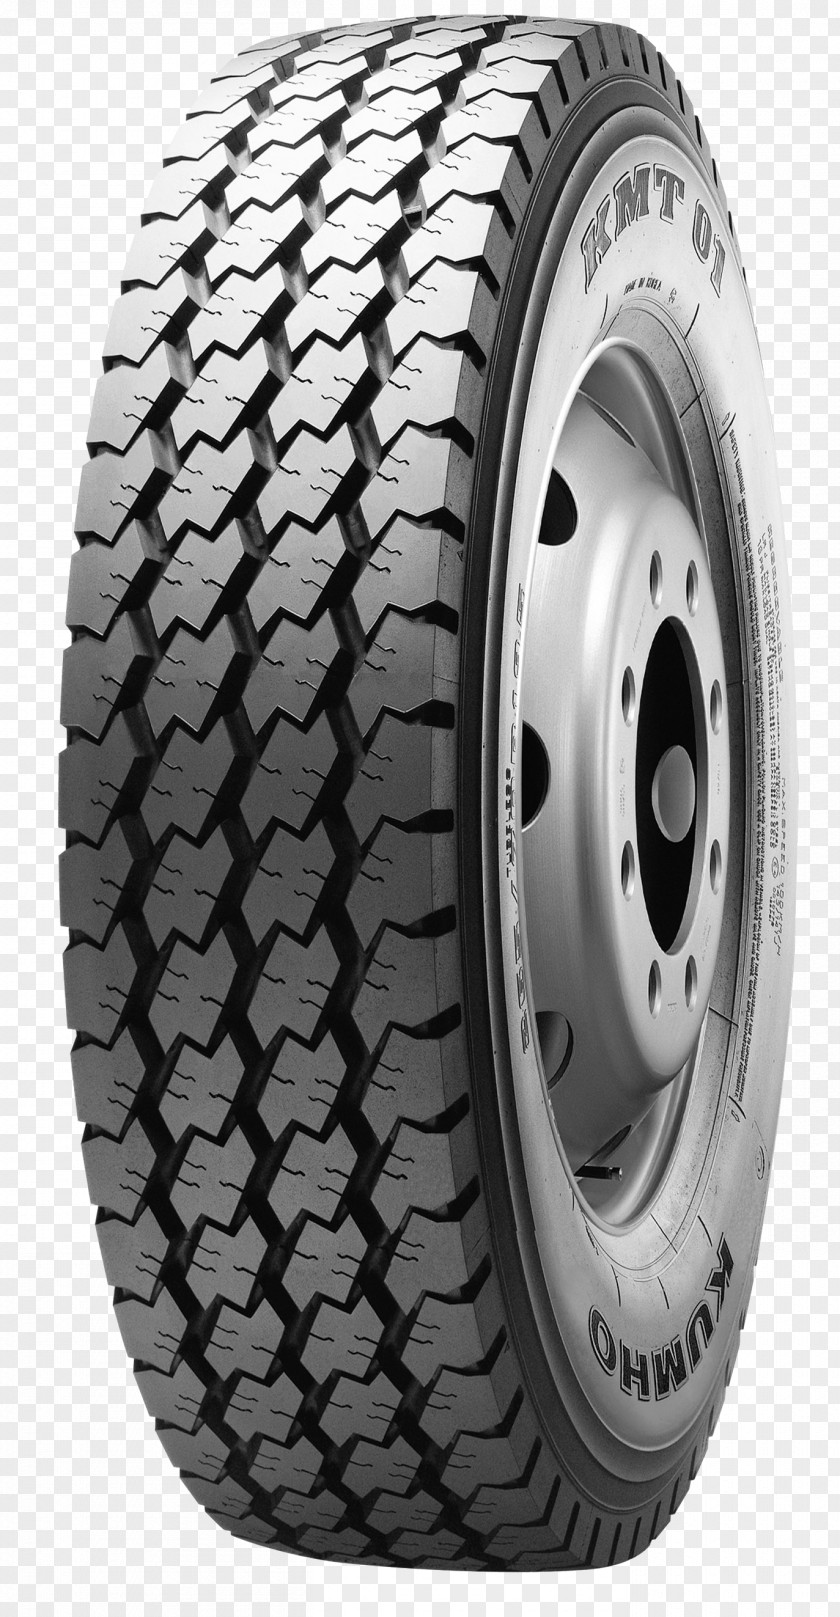 Kumho Tire Tread Car Tyre Label PNG